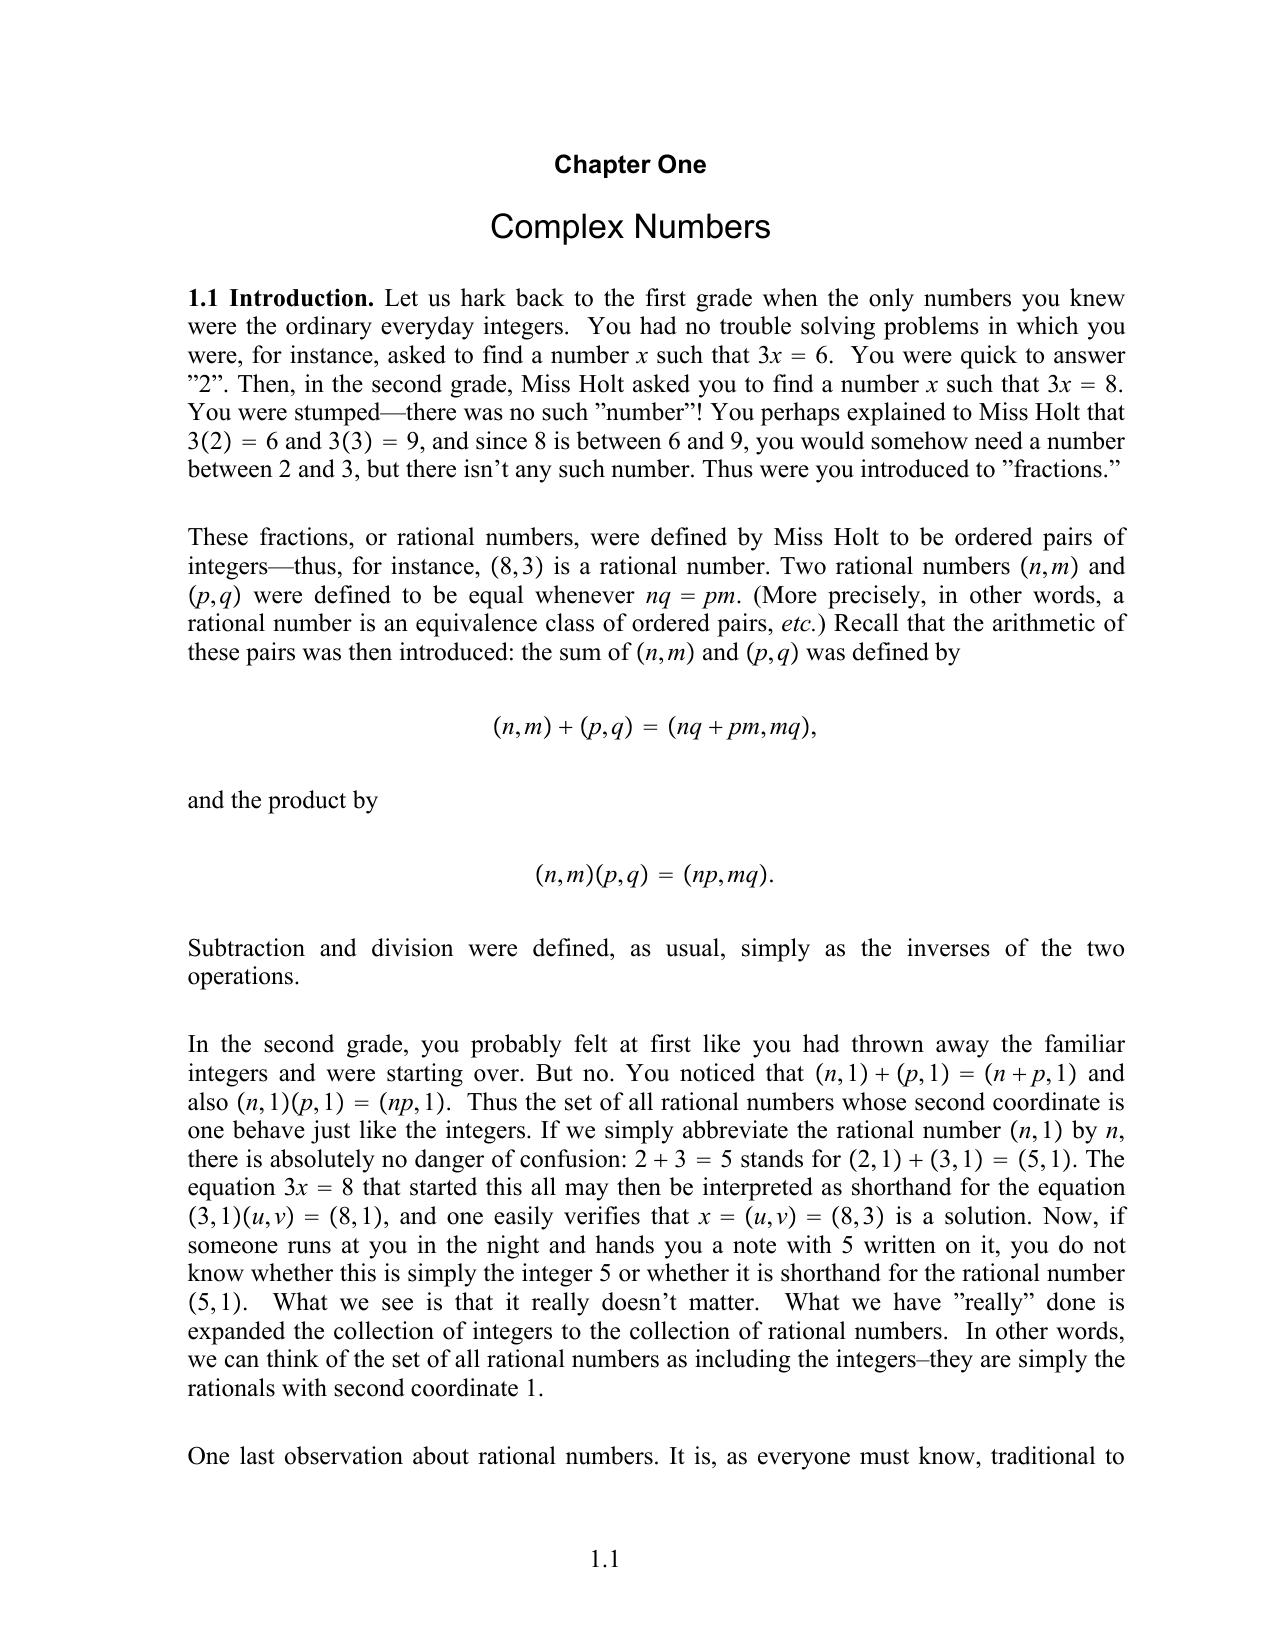 Complex Numbers - Chapter 1